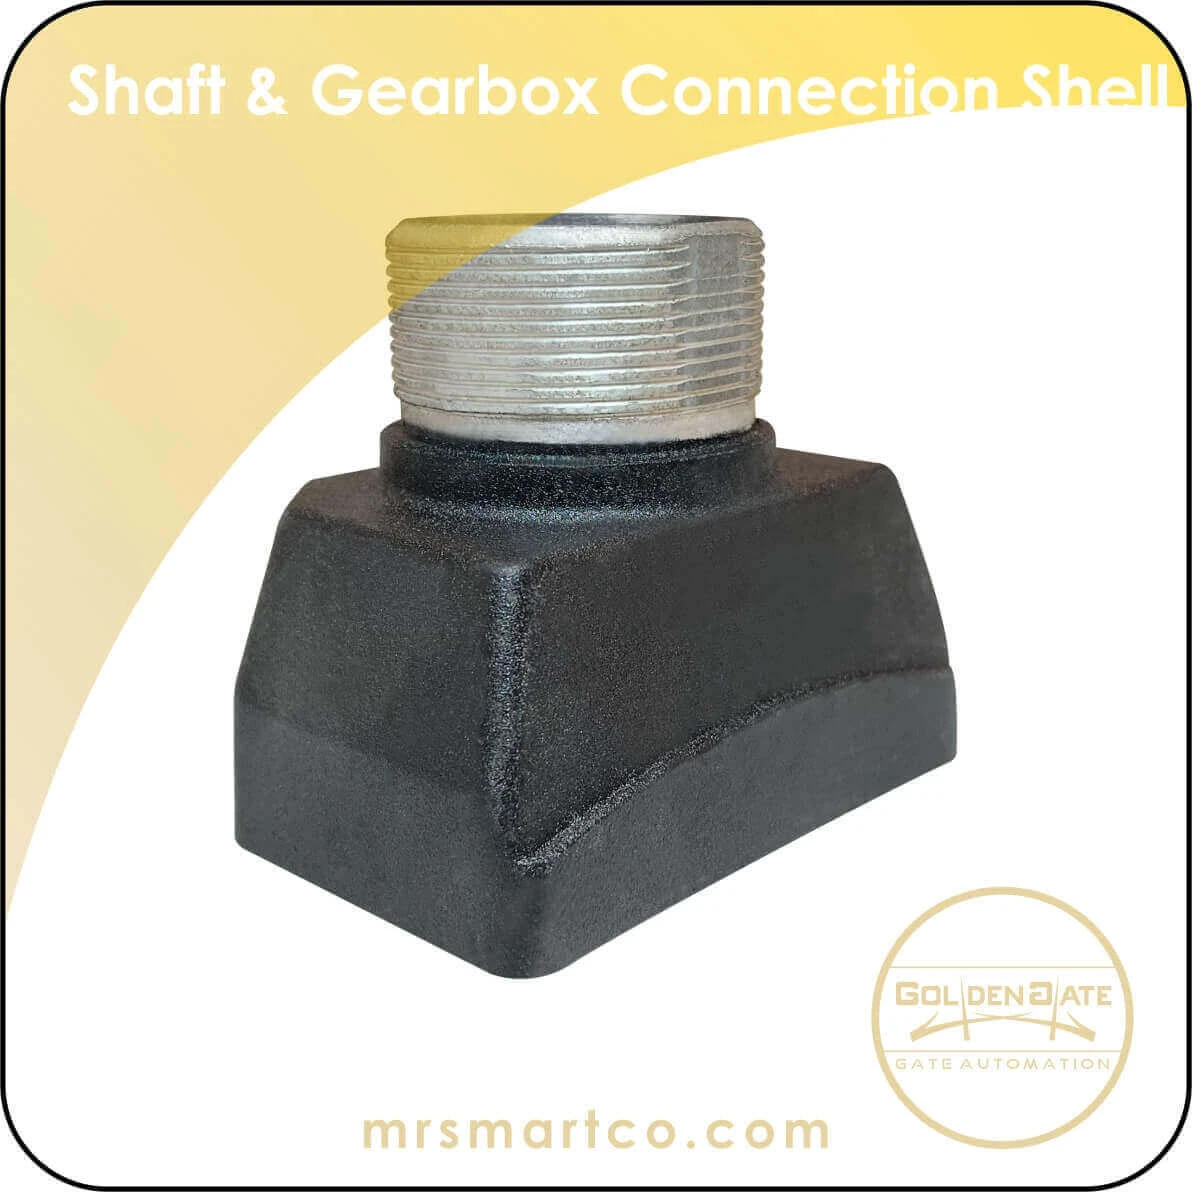 Shaft and gearbox connection shell